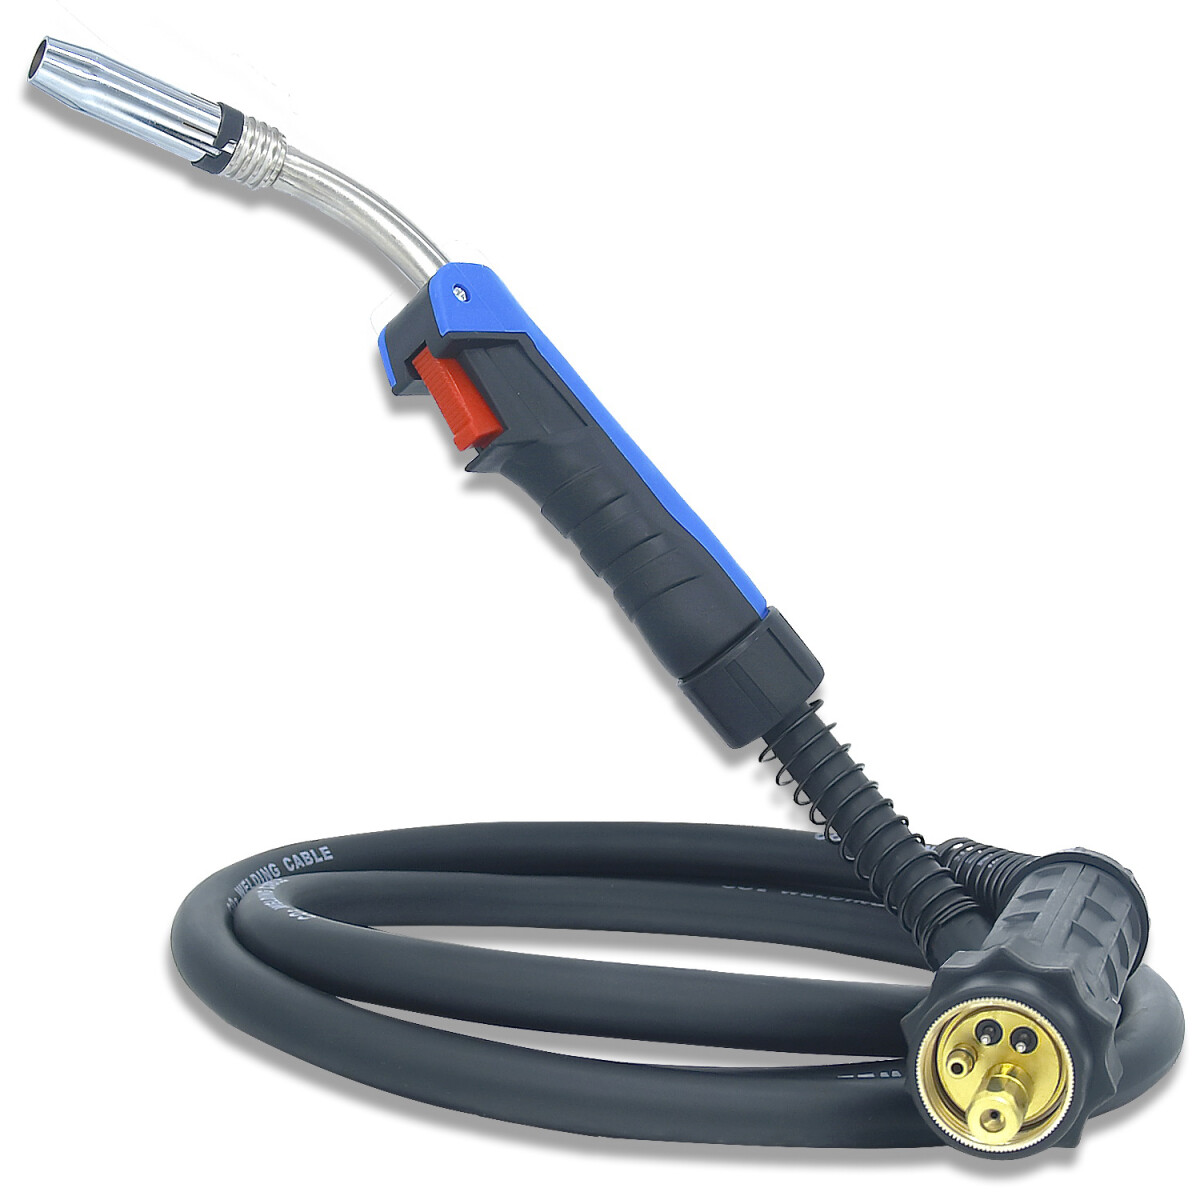 MIG Welding Torch MB25 Euro Standard Fitting Connector Flexible Cable 4 Metre 